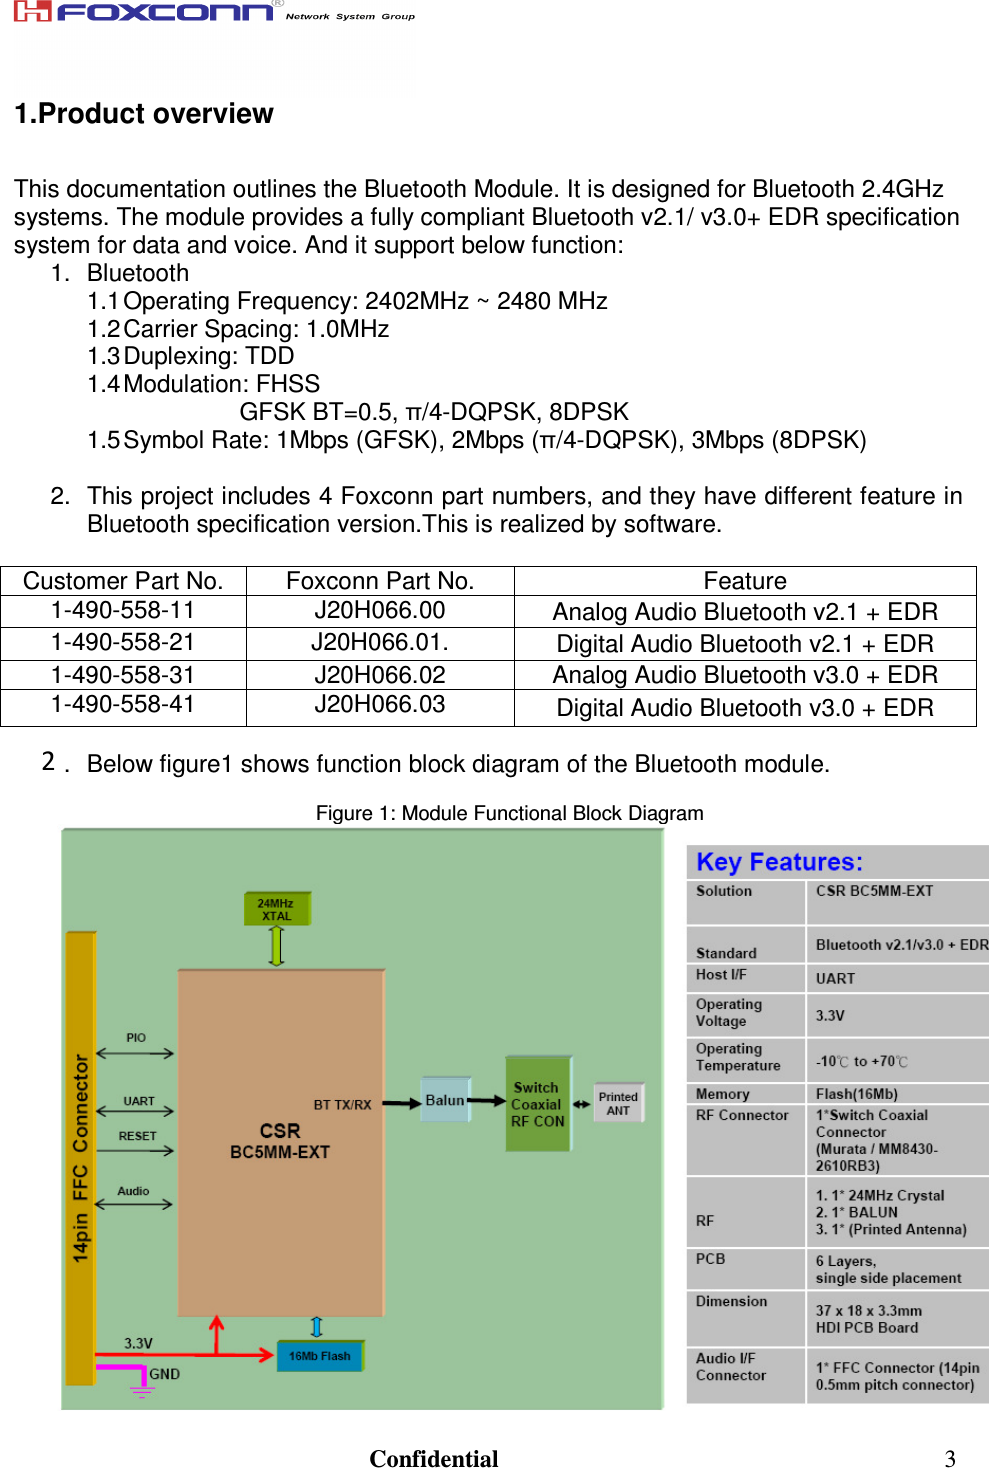                                                                               Confidential  3 1.Product overview  This documentation outlines the Bluetooth Module. It is designed for Bluetooth 2.4GHz systems. The module provides a fully compliant Bluetooth v2.1/ v3.0+ EDR specification system for data and voice. And it support below function: 1.  Bluetooth  1.1 Operating Frequency: 2402MHz ~ 2480 MHz 1.2 Carrier Spacing: 1.0MHz 1.3 Duplexing: TDD 1.4 Modulation: FHSS  GFSK BT=0.5, π/4-DQPSK, 8DPSK 1.5 Symbol Rate: 1Mbps (GFSK), 2Mbps (π/4-DQPSK), 3Mbps (8DPSK)  2.  This project includes 4 Foxconn part numbers, and they have different feature in Bluetooth specification version.This is realized by software.  Customer Part No.  Foxconn Part No.  Feature 1-490-558-11  J20H066.00  Analog Audio Bluetooth v2.1 + EDR 1-490-558-21  J20H066.01.  Digital Audio Bluetooth v2.1 + EDR 1-490-558-31  J20H066.02  Analog Audio Bluetooth v3.0 + EDR 1-490-558-41  J20H066.03  Digital Audio Bluetooth v3.0 + EDR  3.  Below figure1 shows function block diagram of the Bluetooth module.  Figure 1: Module Functional Block Diagram  2